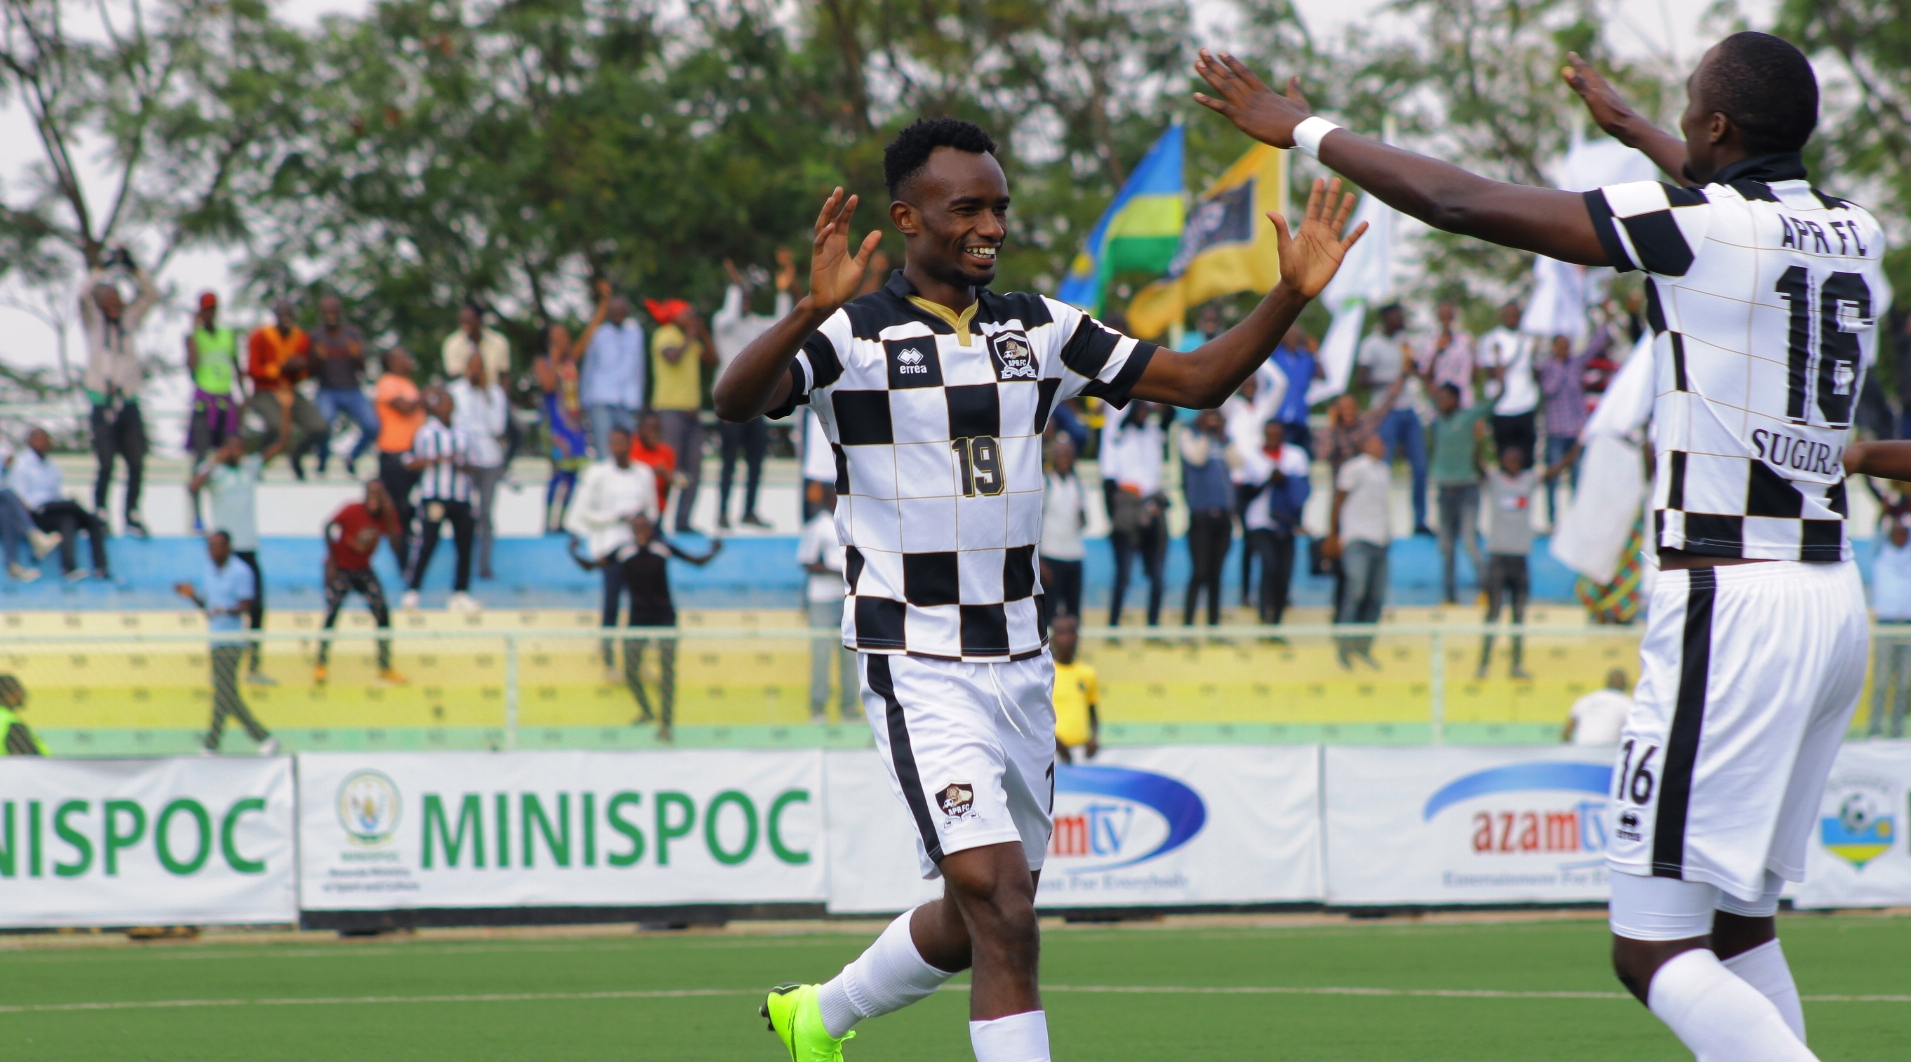 Dany Usengimana (L) celebrates with Ernest Sugira after scoring his second goal during APRu2019s 4-0 win over Heegan at Kigali Stadium on Thursday. / Courtesy